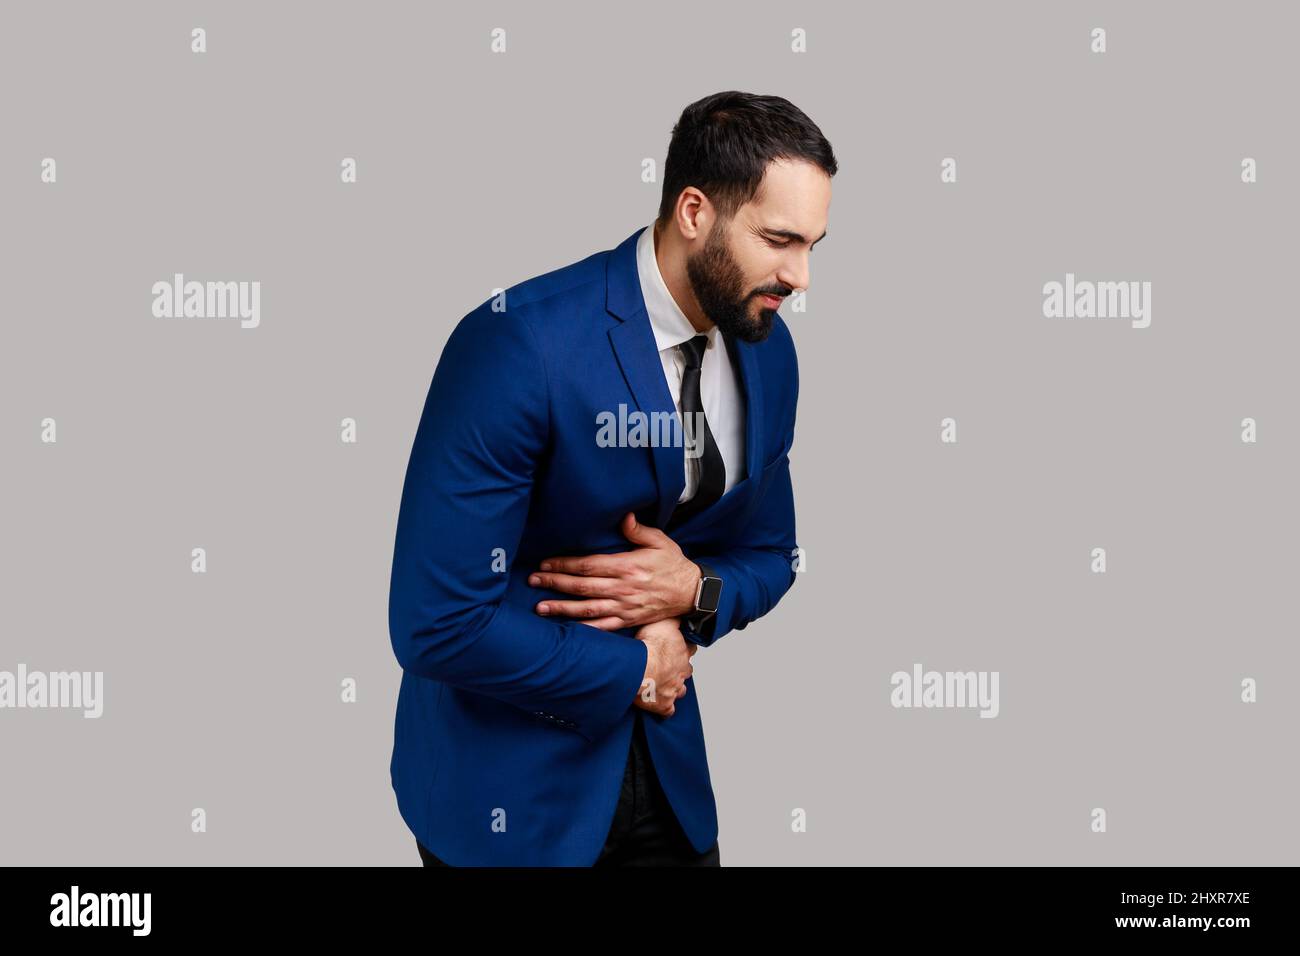 Bearded man touching belly, grimacing from stomach ache, severe abdominal distress, symptoms of constipation, indigestion, gastrointestinal disorder. Indoor studio shot isolated on gray background. Stock Photo